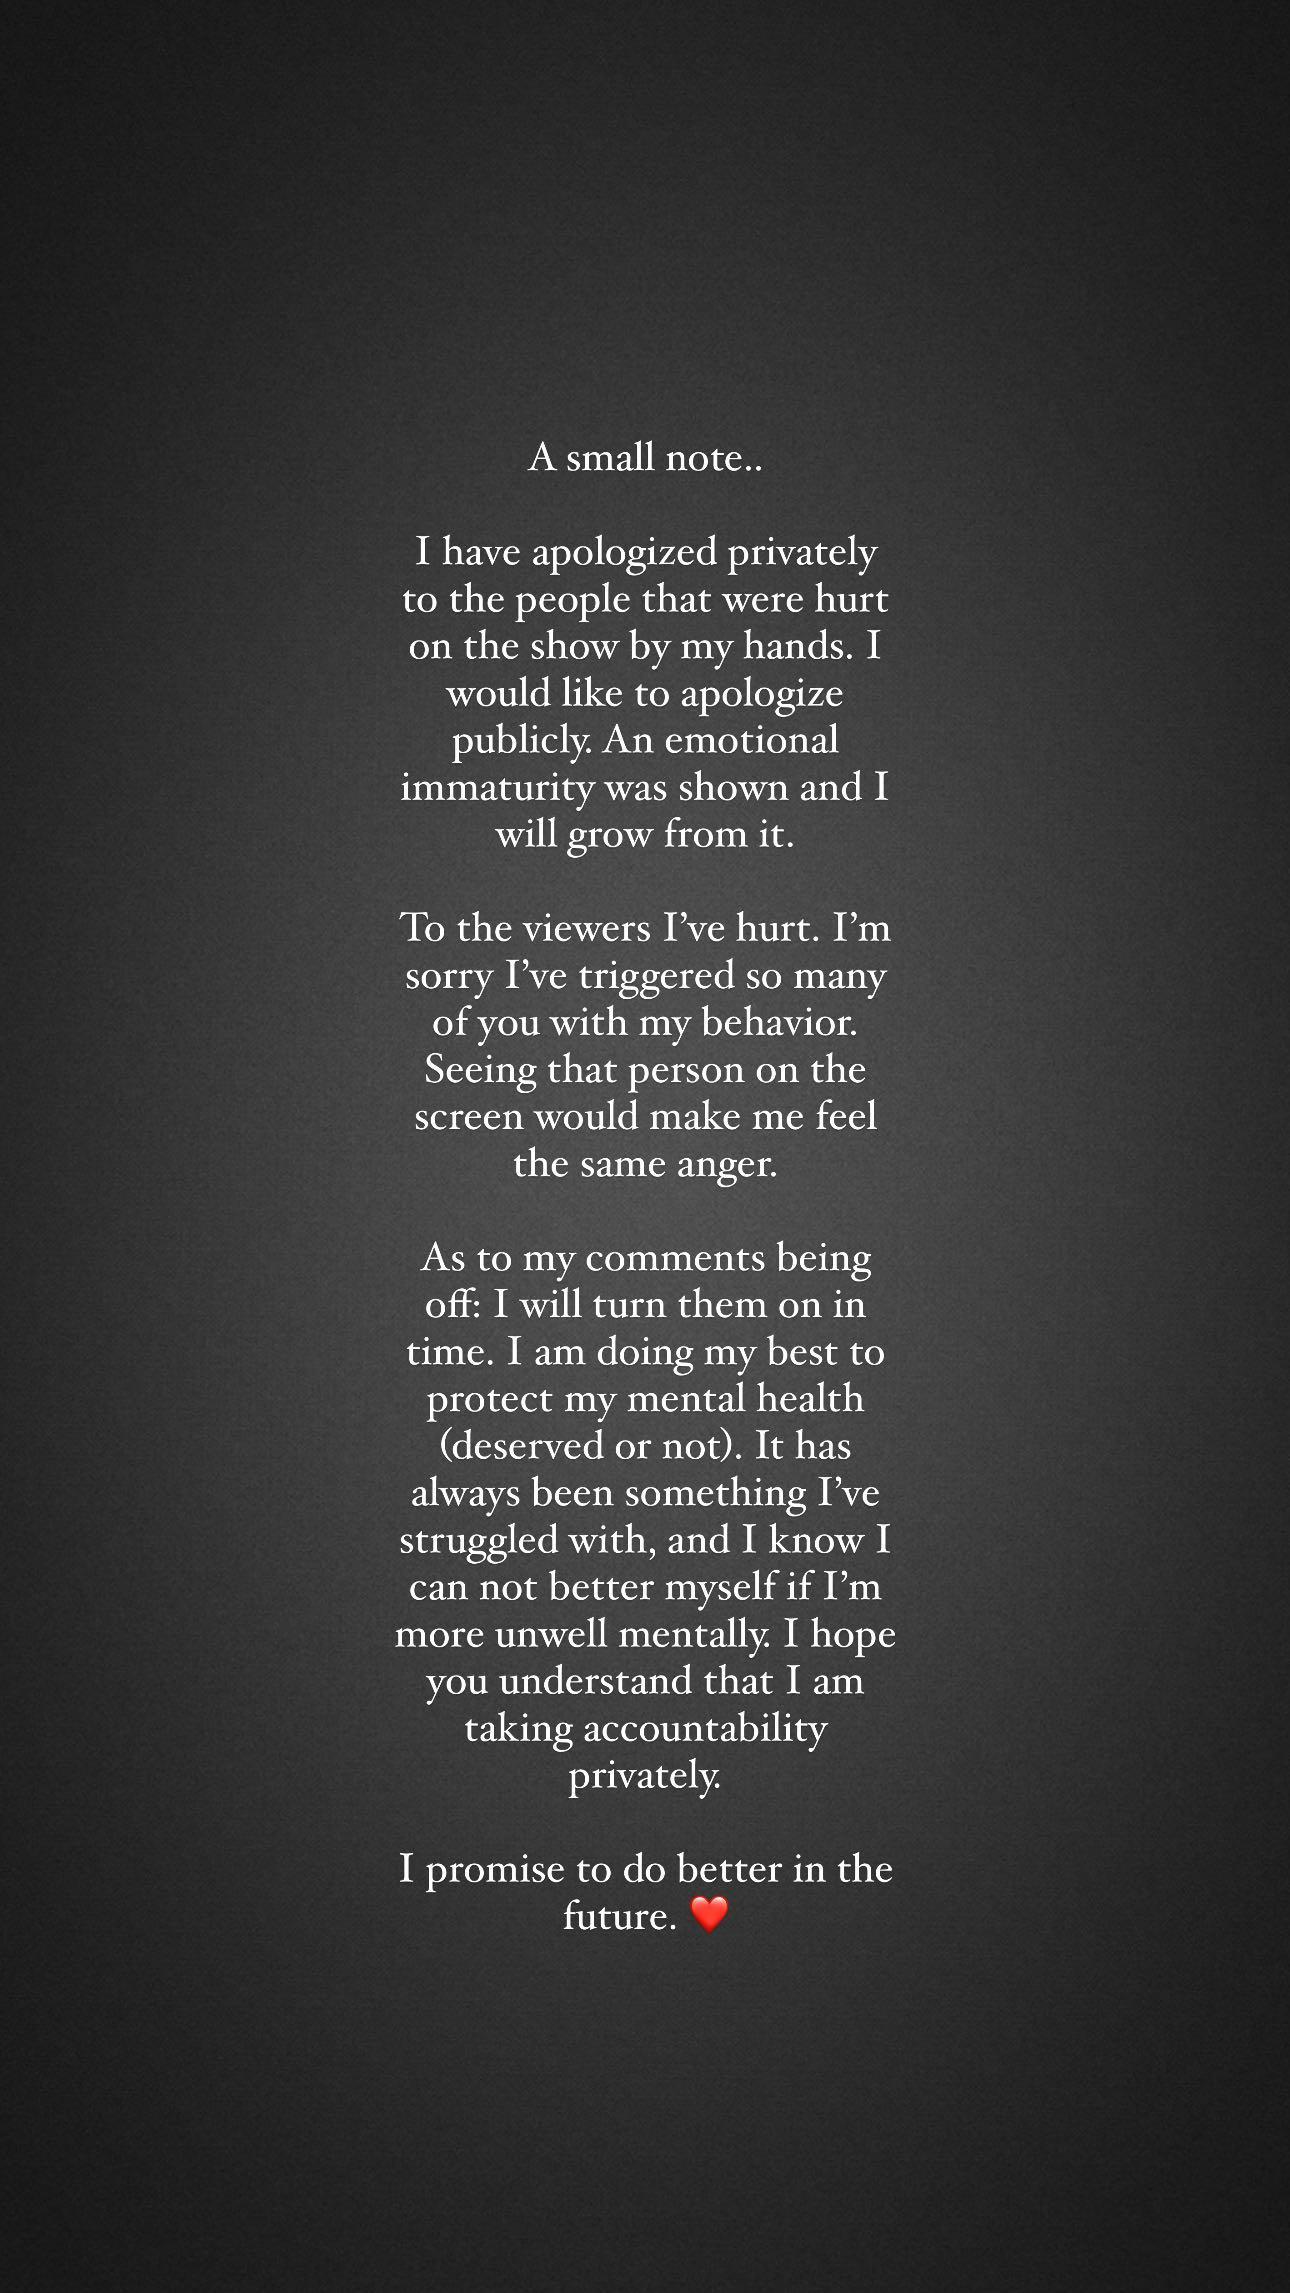 Micah Lussier's Insta story apology